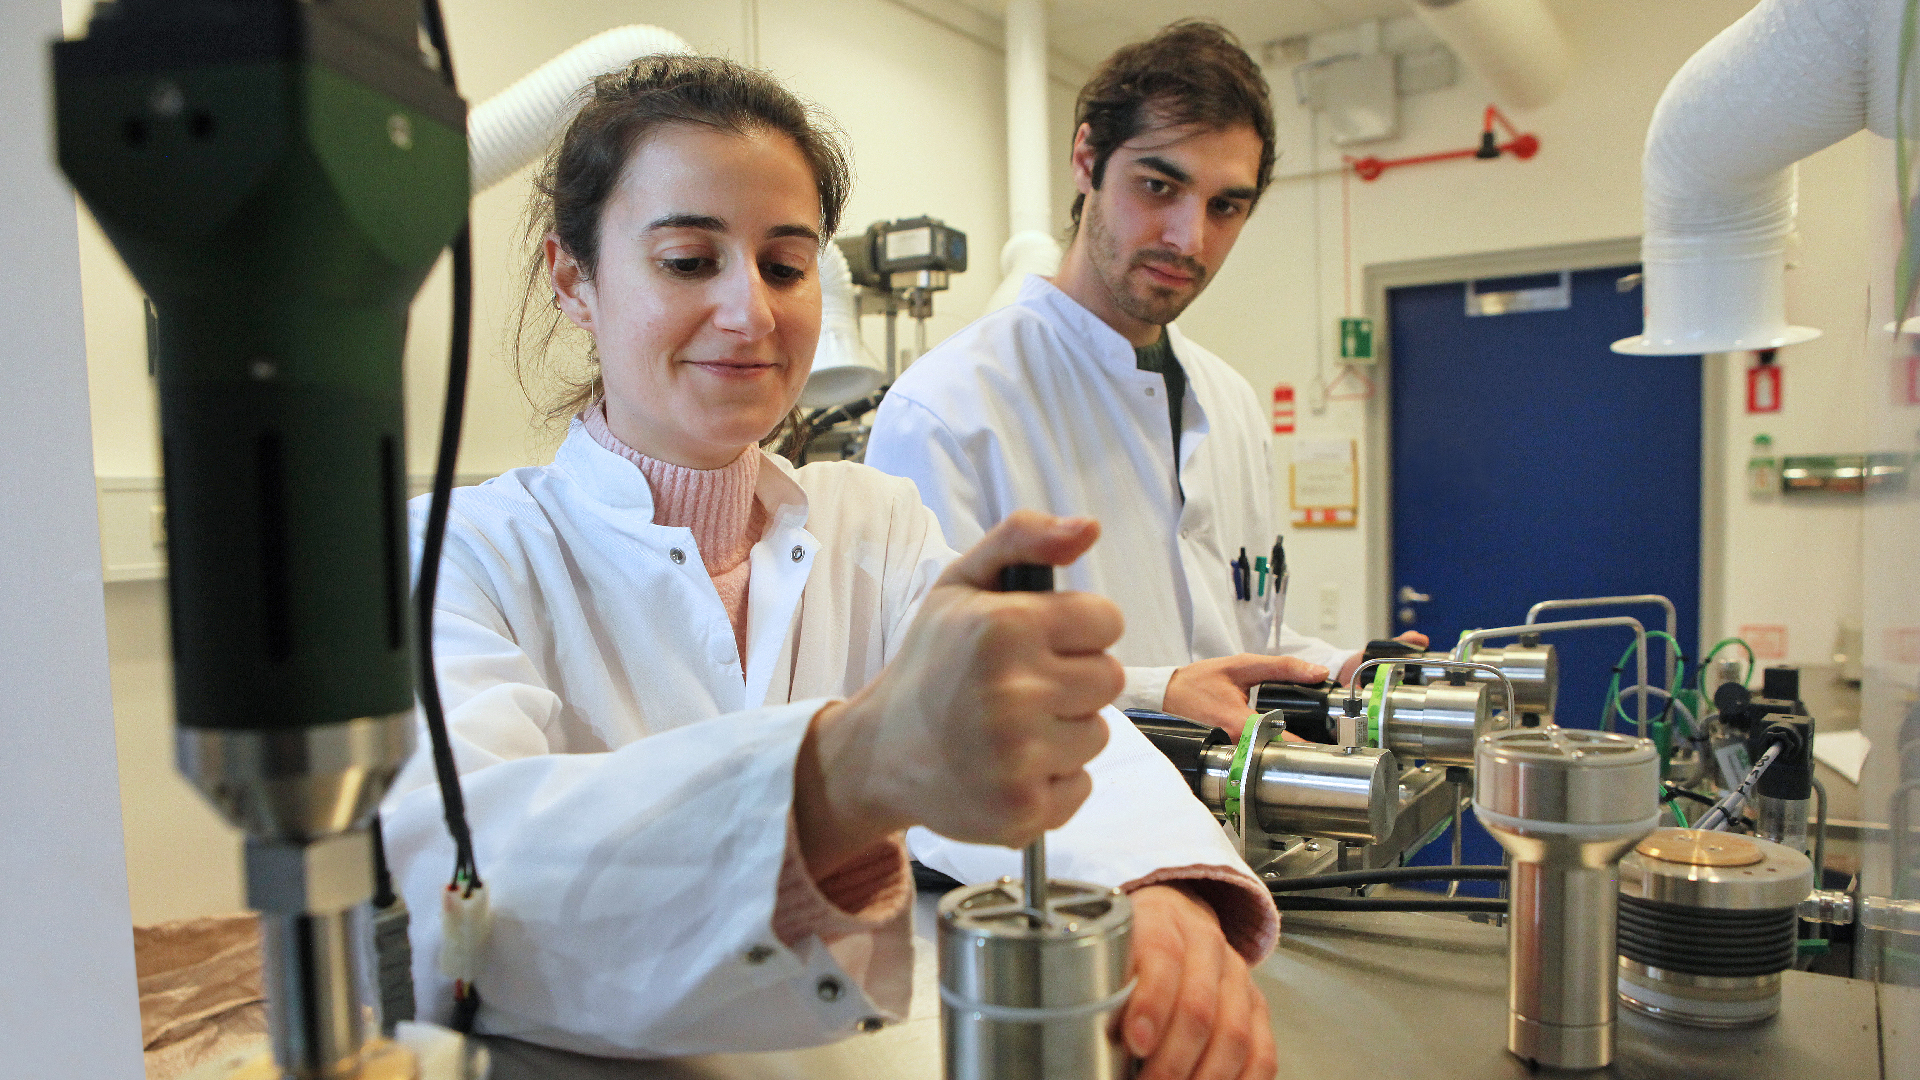 PhD students in the lab